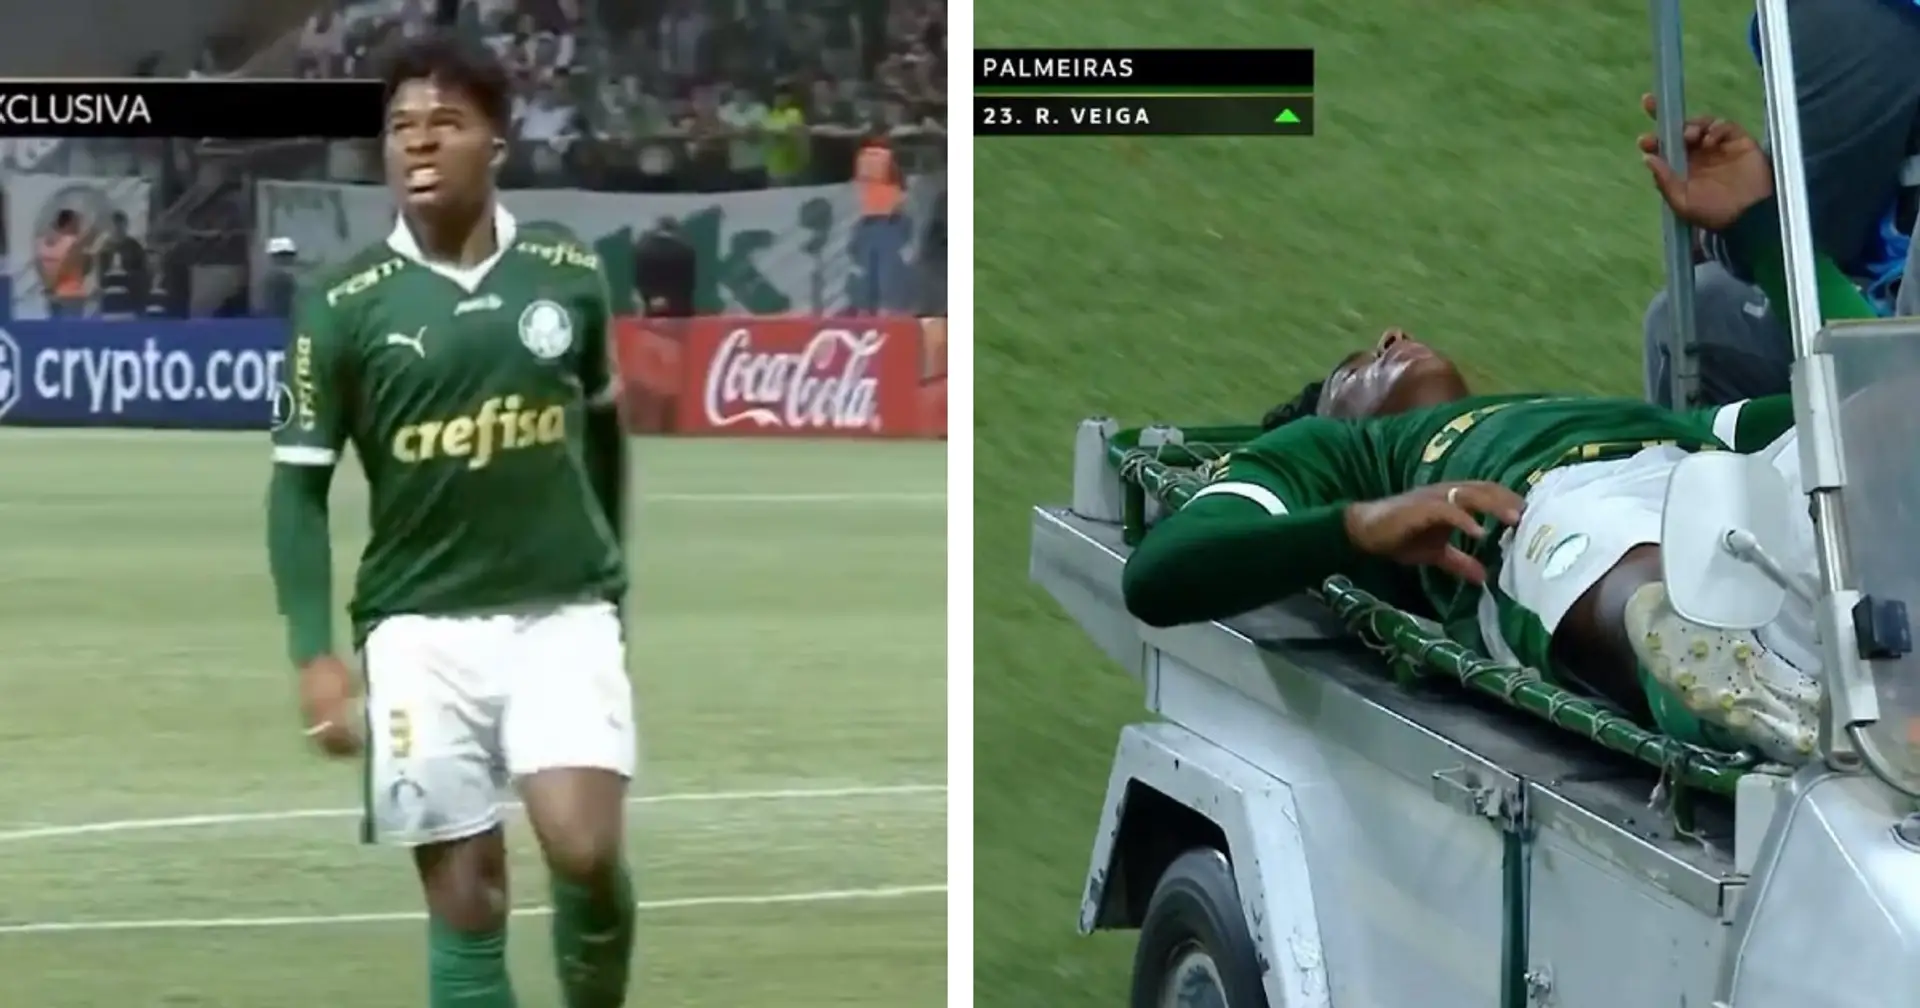 Endrick stretchered off after injury in Palmeiras game